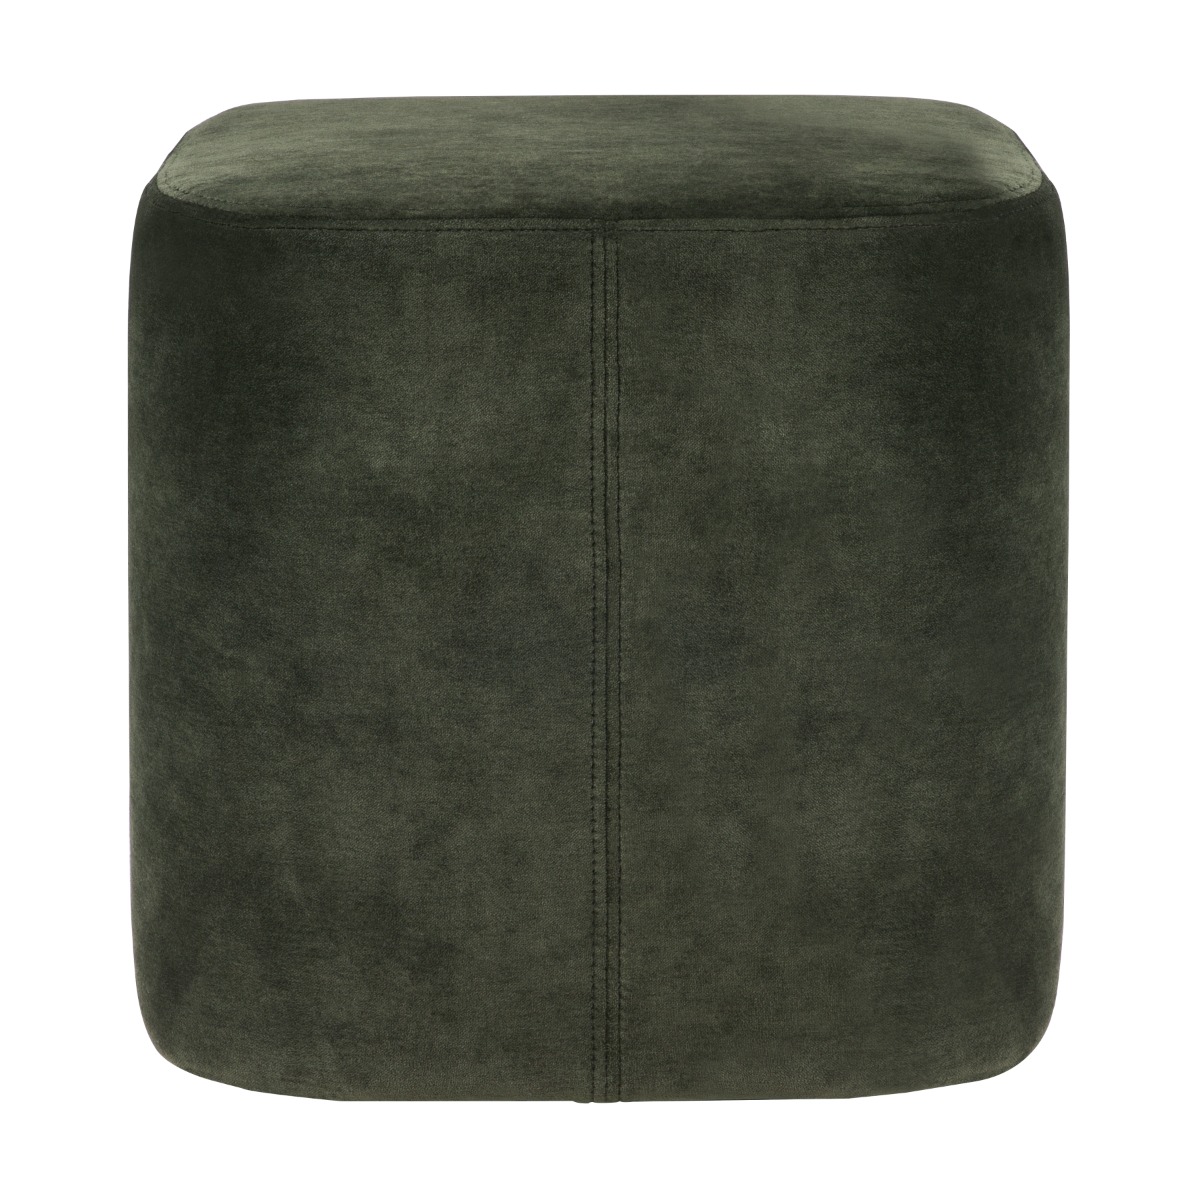 Cube Footstool in Forest Green